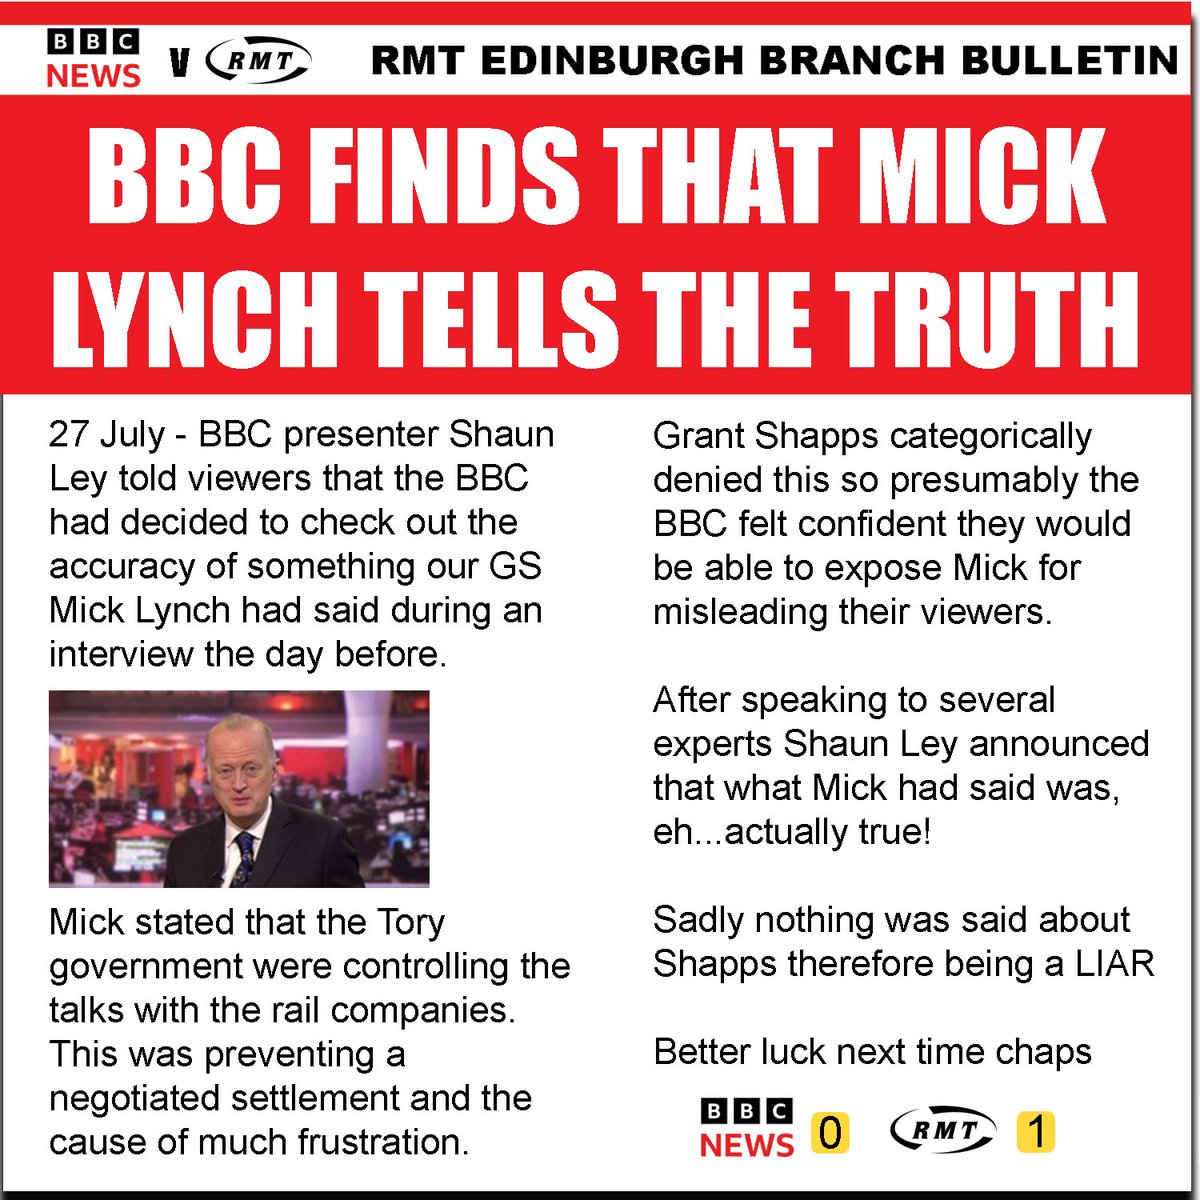 BBC would be on to a winner if they spent time checking the accuracy of what Tory MPs say! @RMT_Scotland @RMTunion @The_TUC @ScottishTUC @PrivateEyeNews